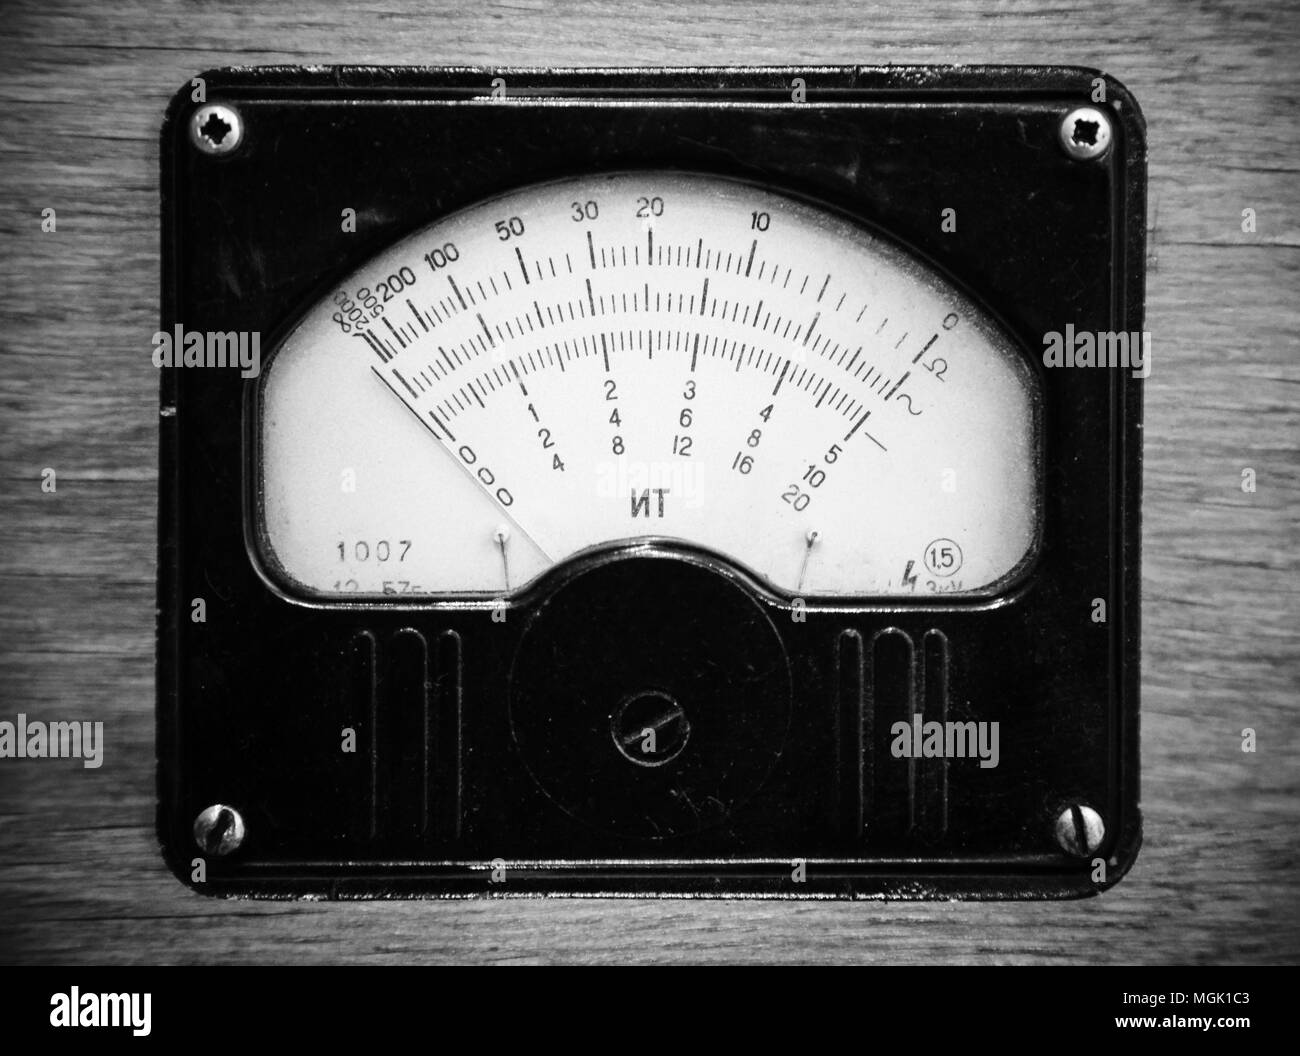 Close-up monochrome photo of vintage electric voltmeter in wooden panel Stock Photo